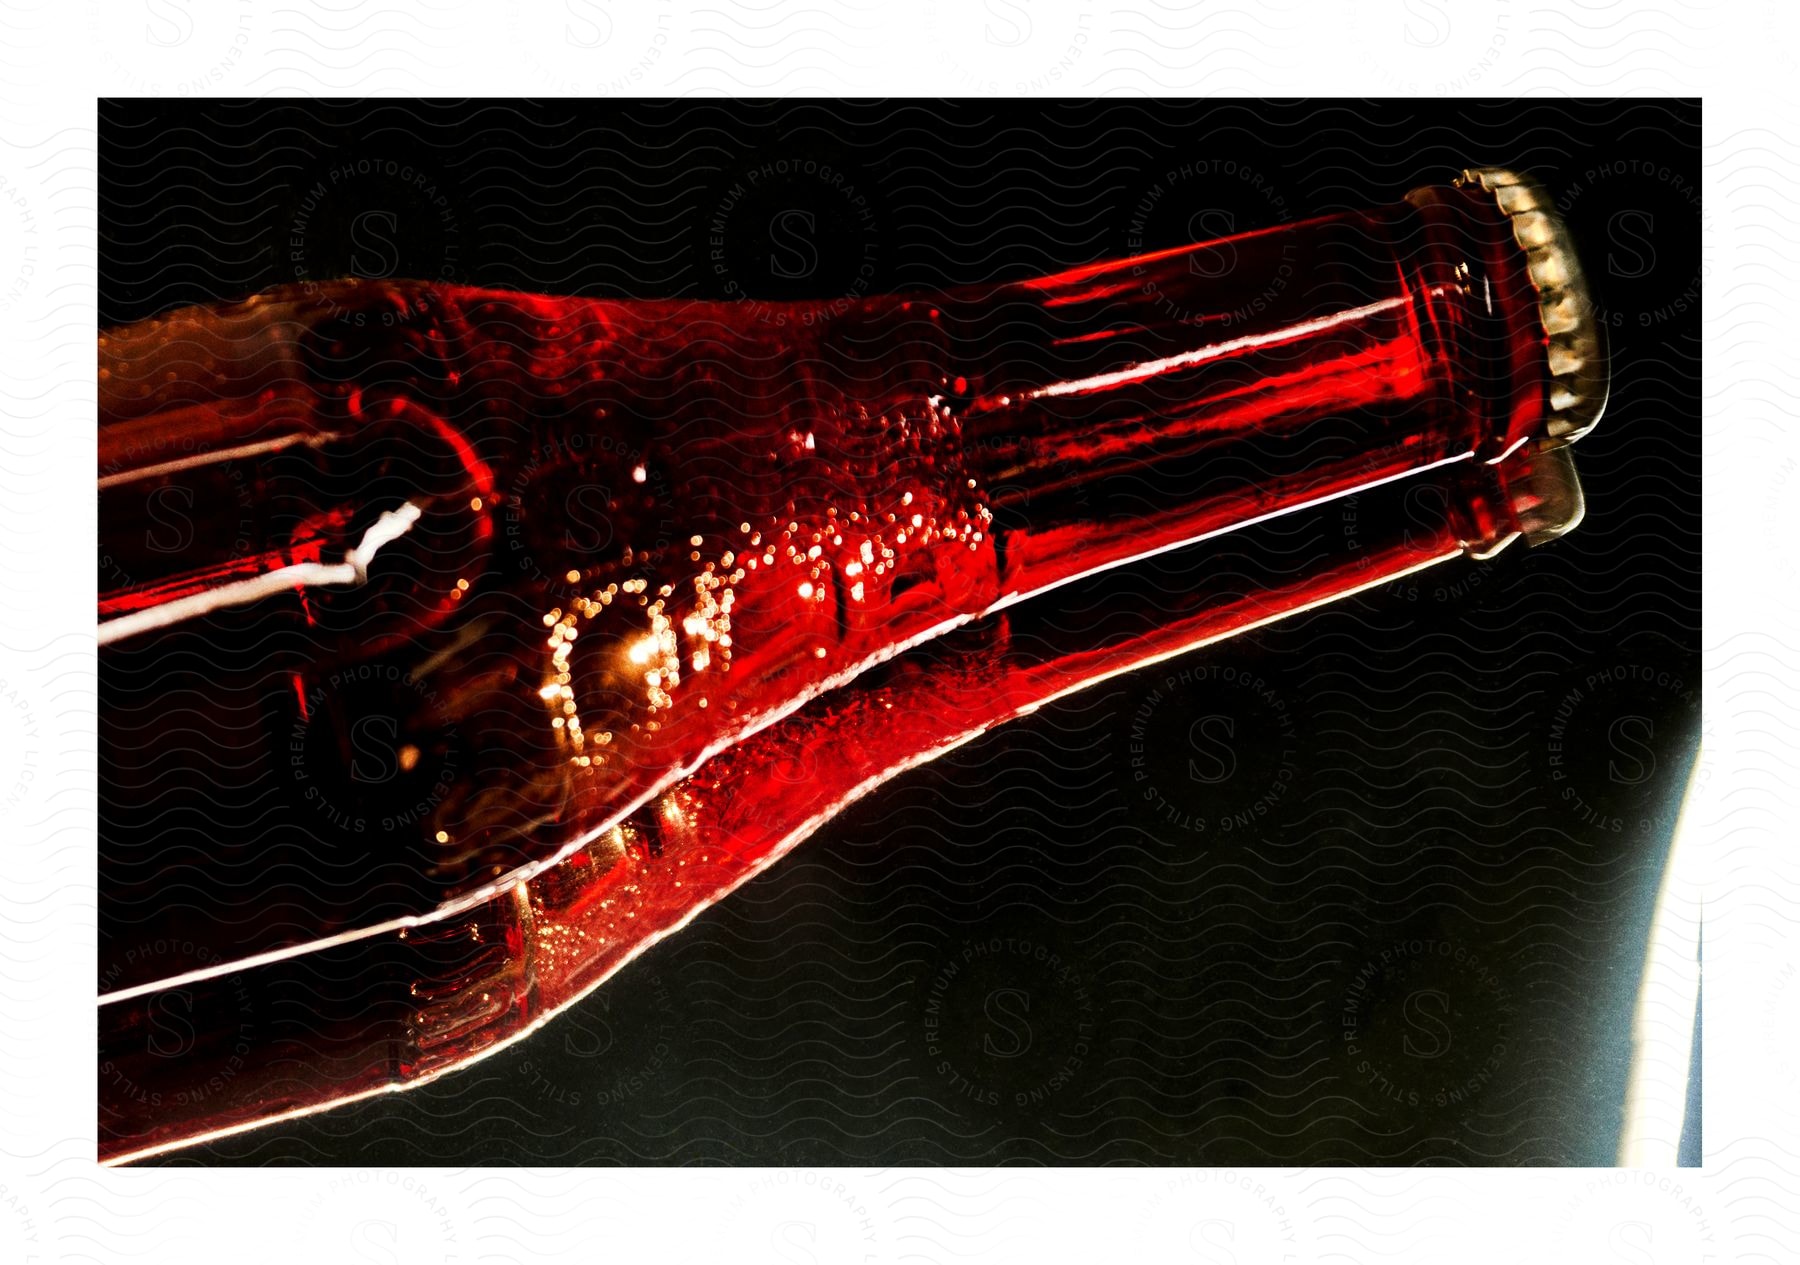 A mirrored image of a glass bottle of soda pop.